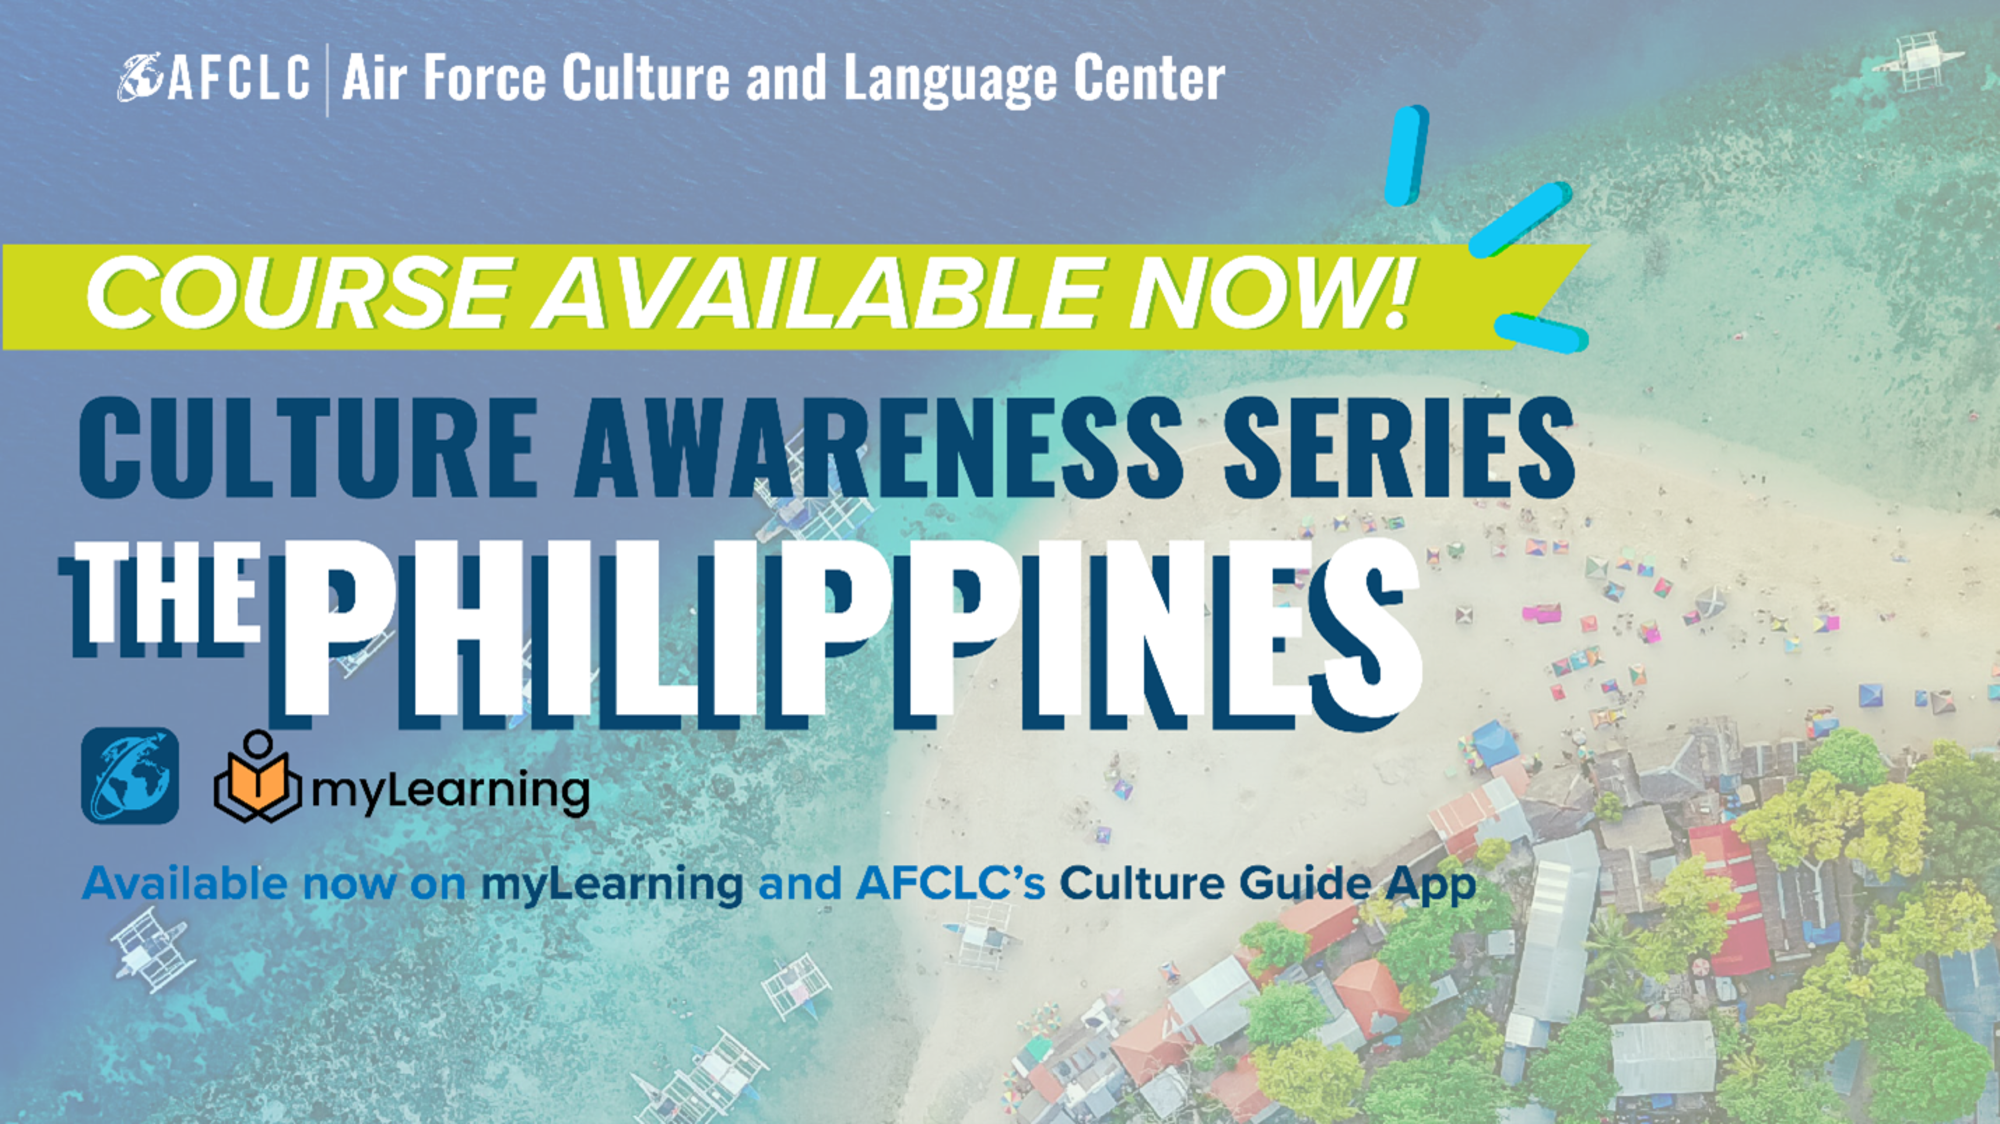 The Air Force Culture and Language Center recently released an “Introduction to the Philippines” course on its free Culture Guide mobile app – one of 10 Department of the Air Force-certified courses available via the app and the myLearning platform.